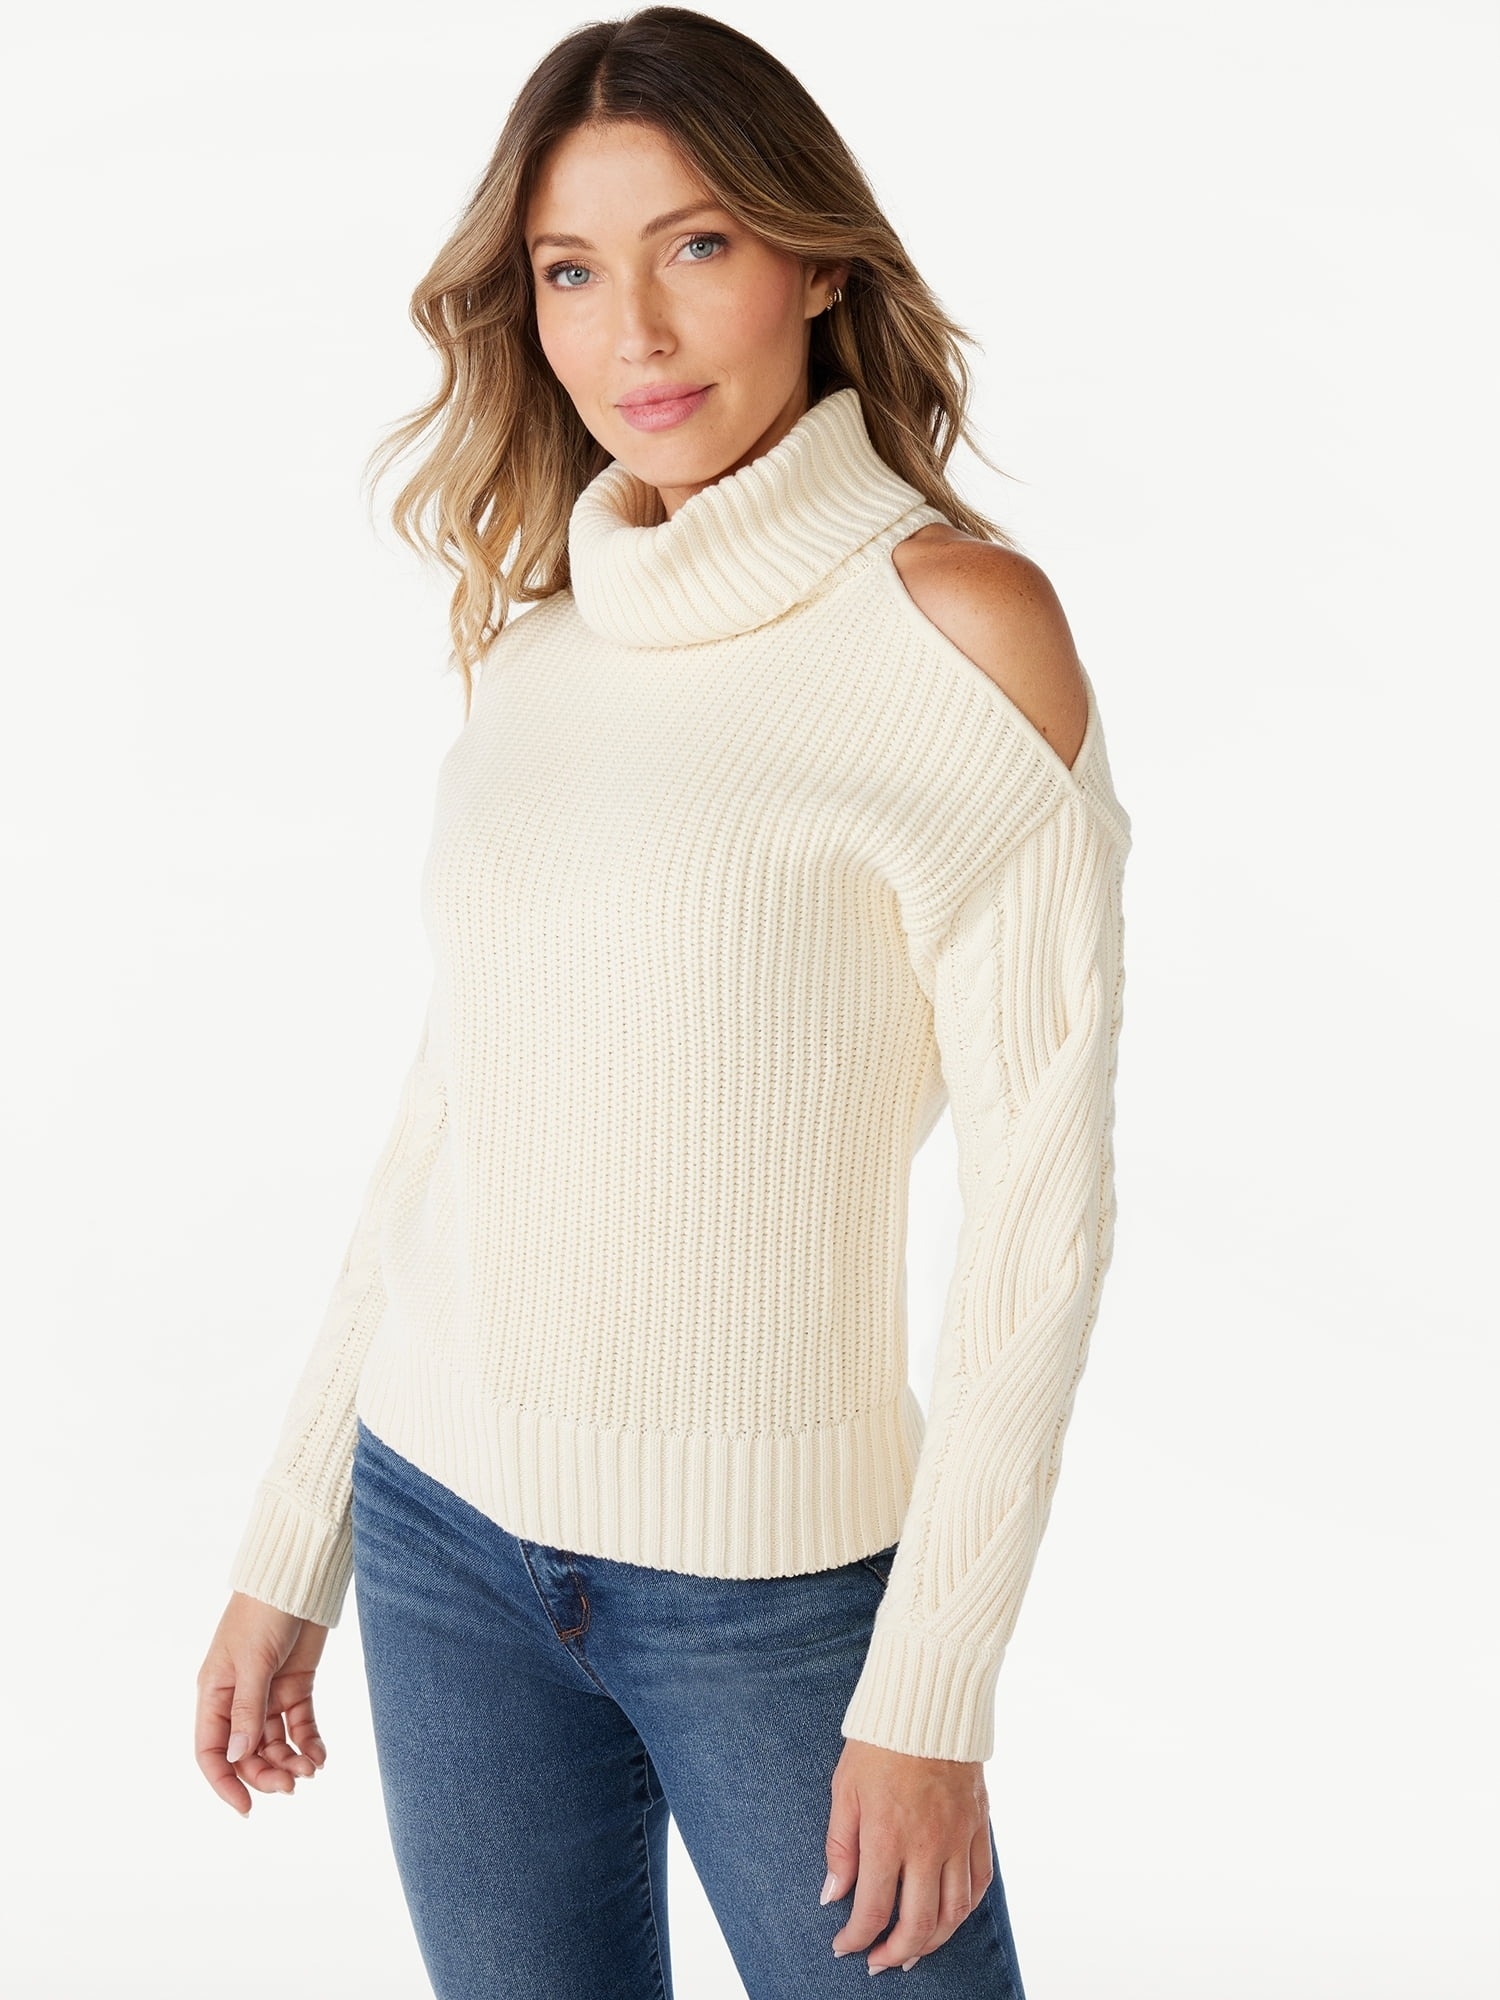 a model in a cream turtleneck sweater with shoulder cutout